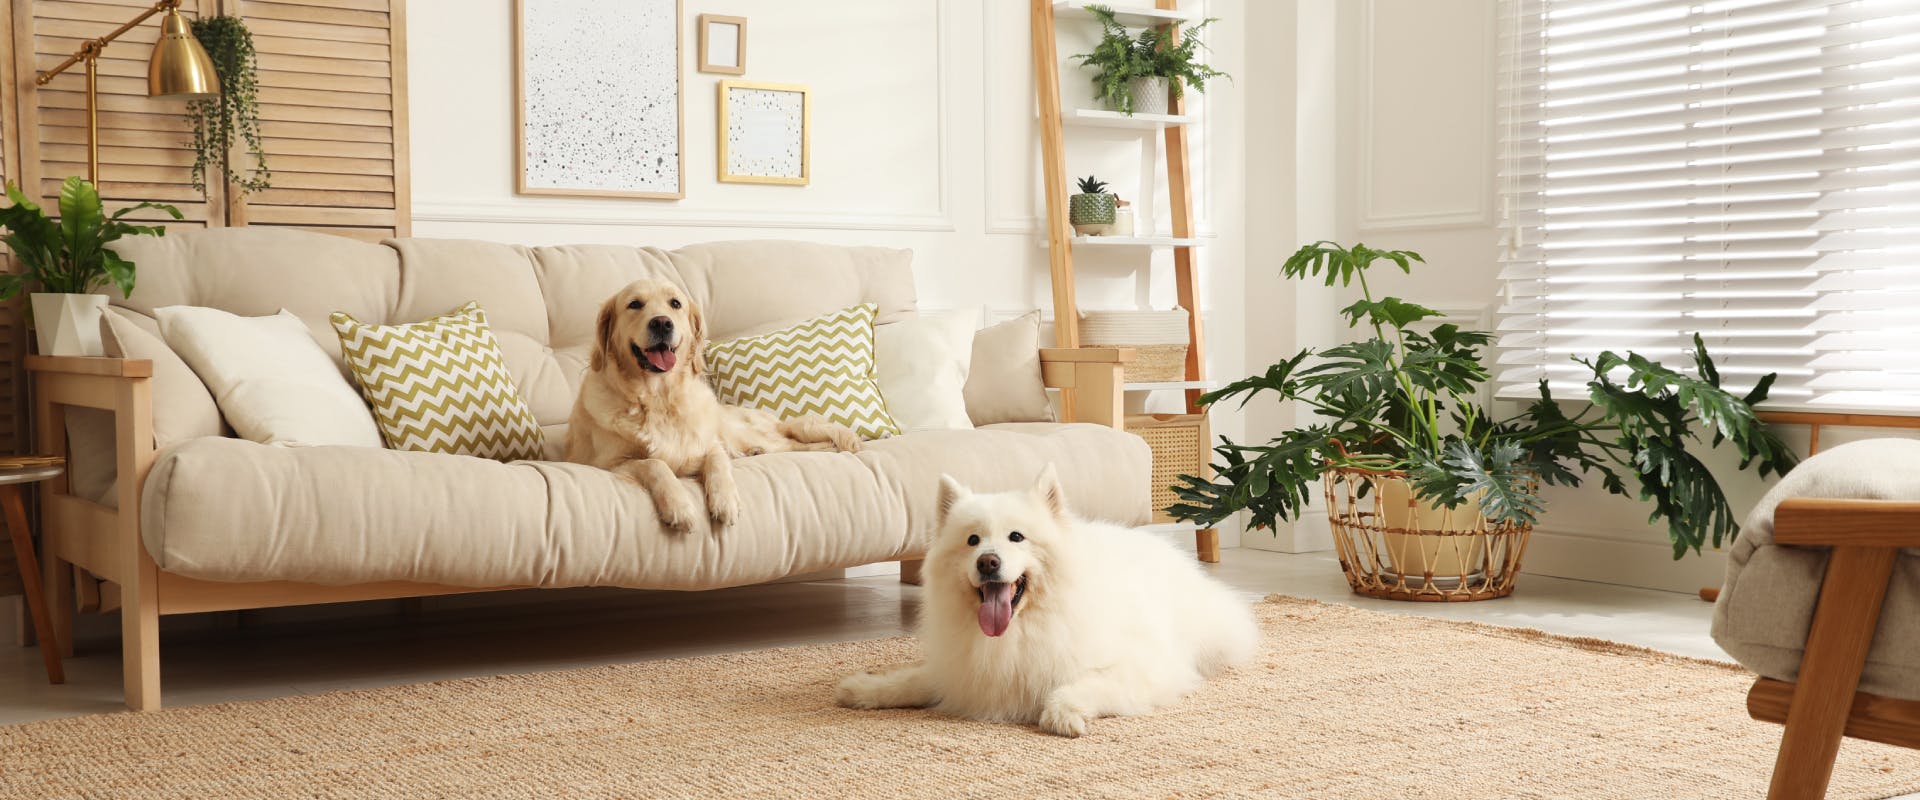 a samoyed lying on the floor of a luxury house next to a white sofa with a golden retriever lying on it